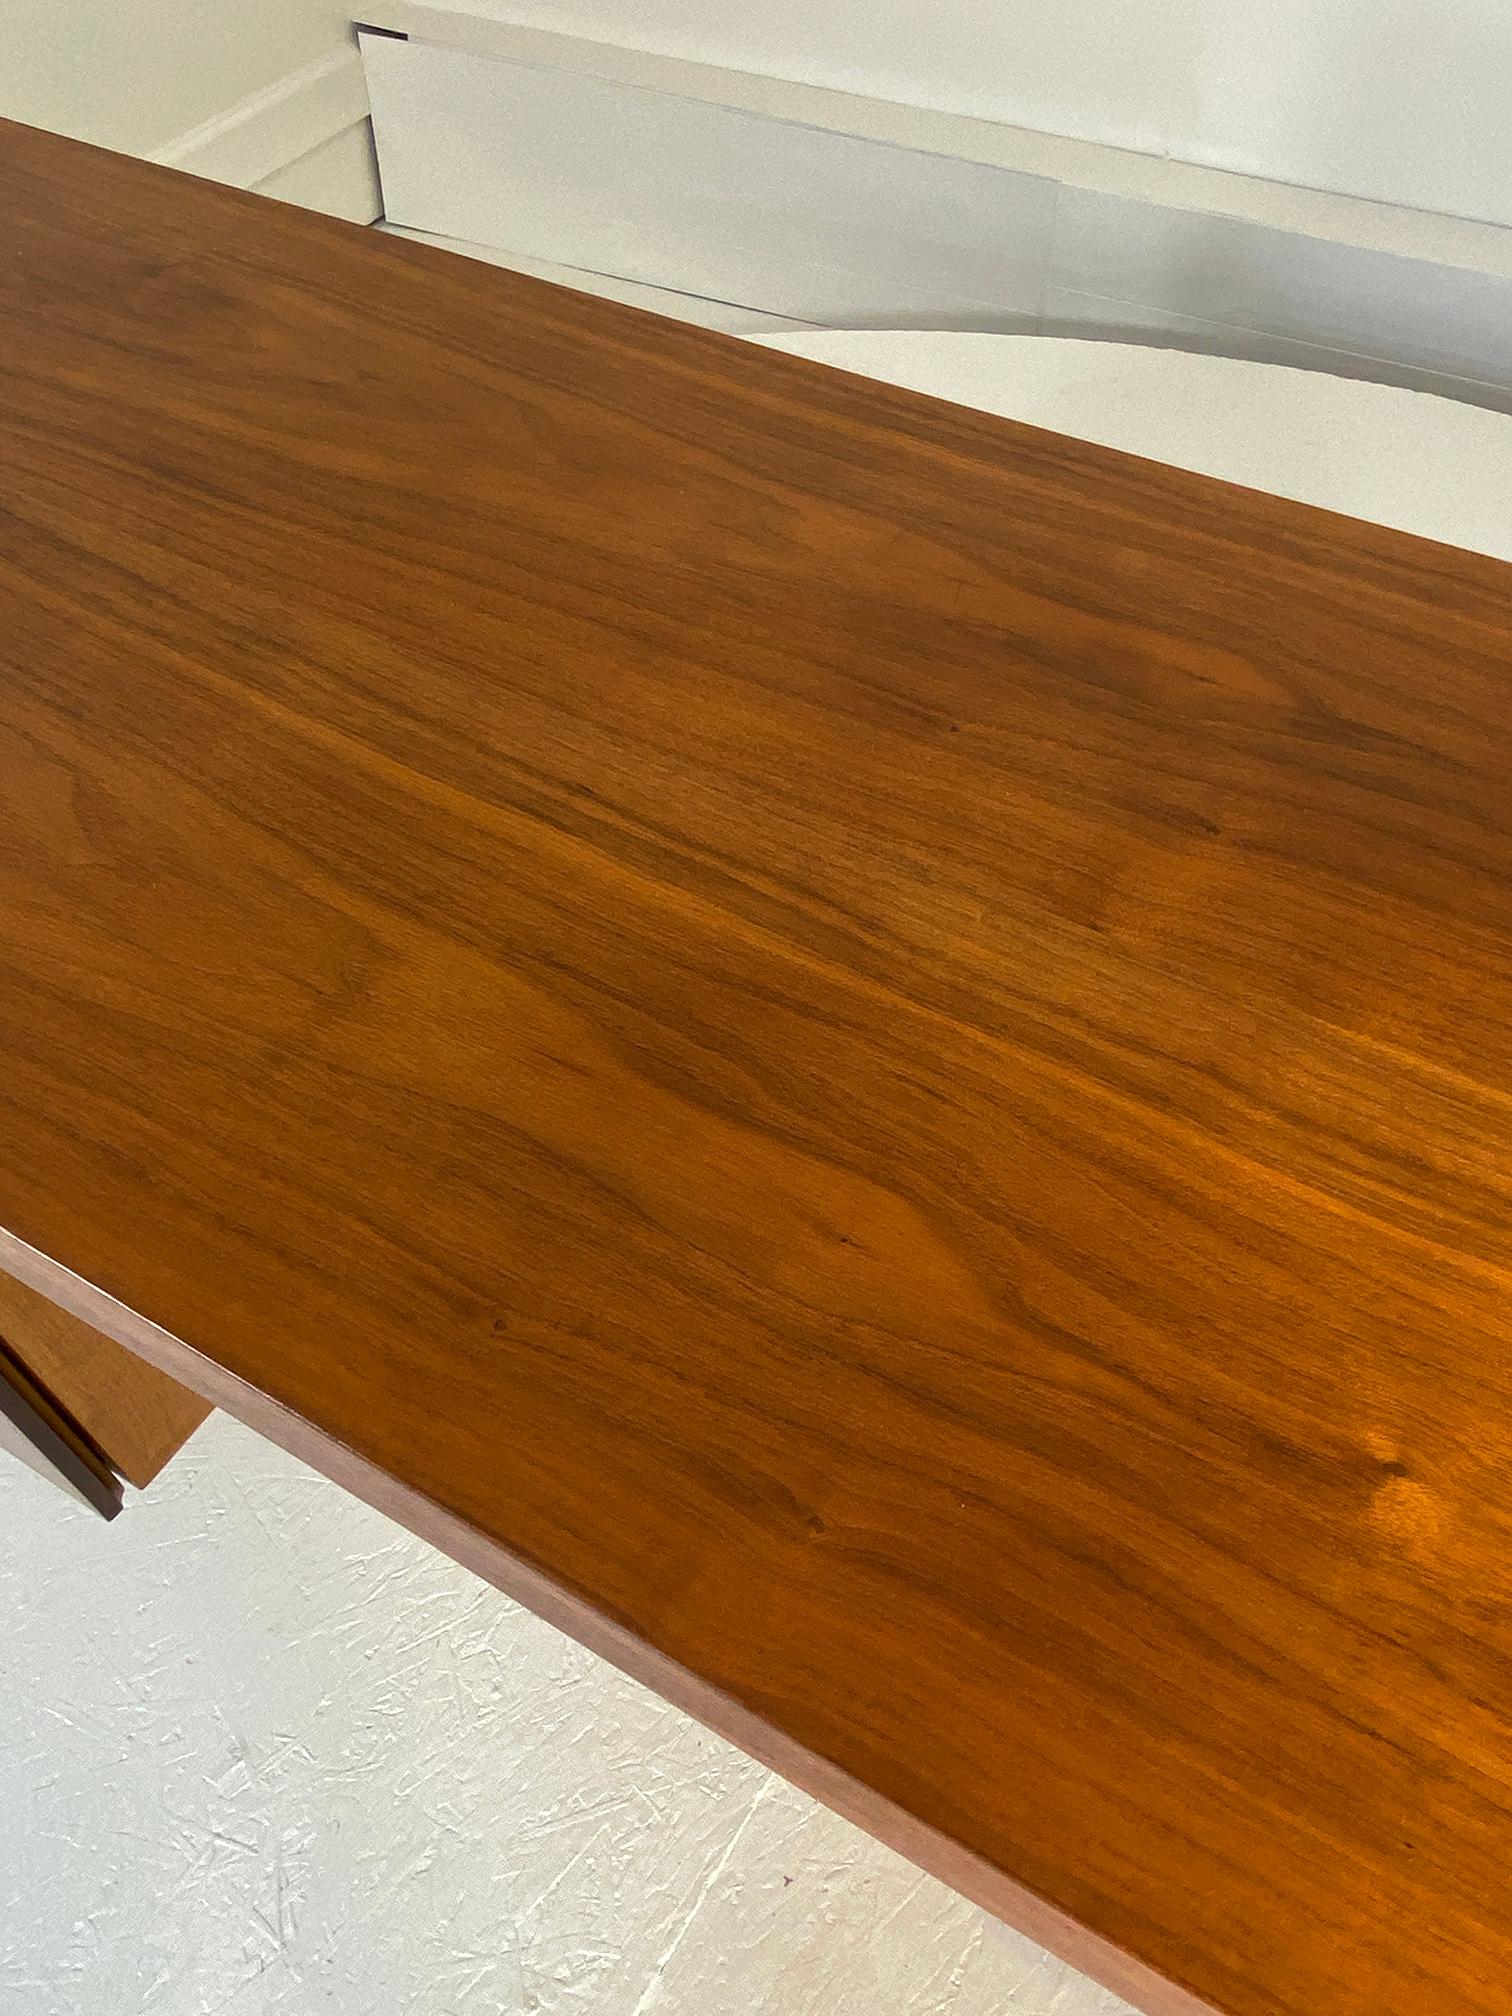 Thin Profile Walnut Desk with Chrome Accents For Sale 1